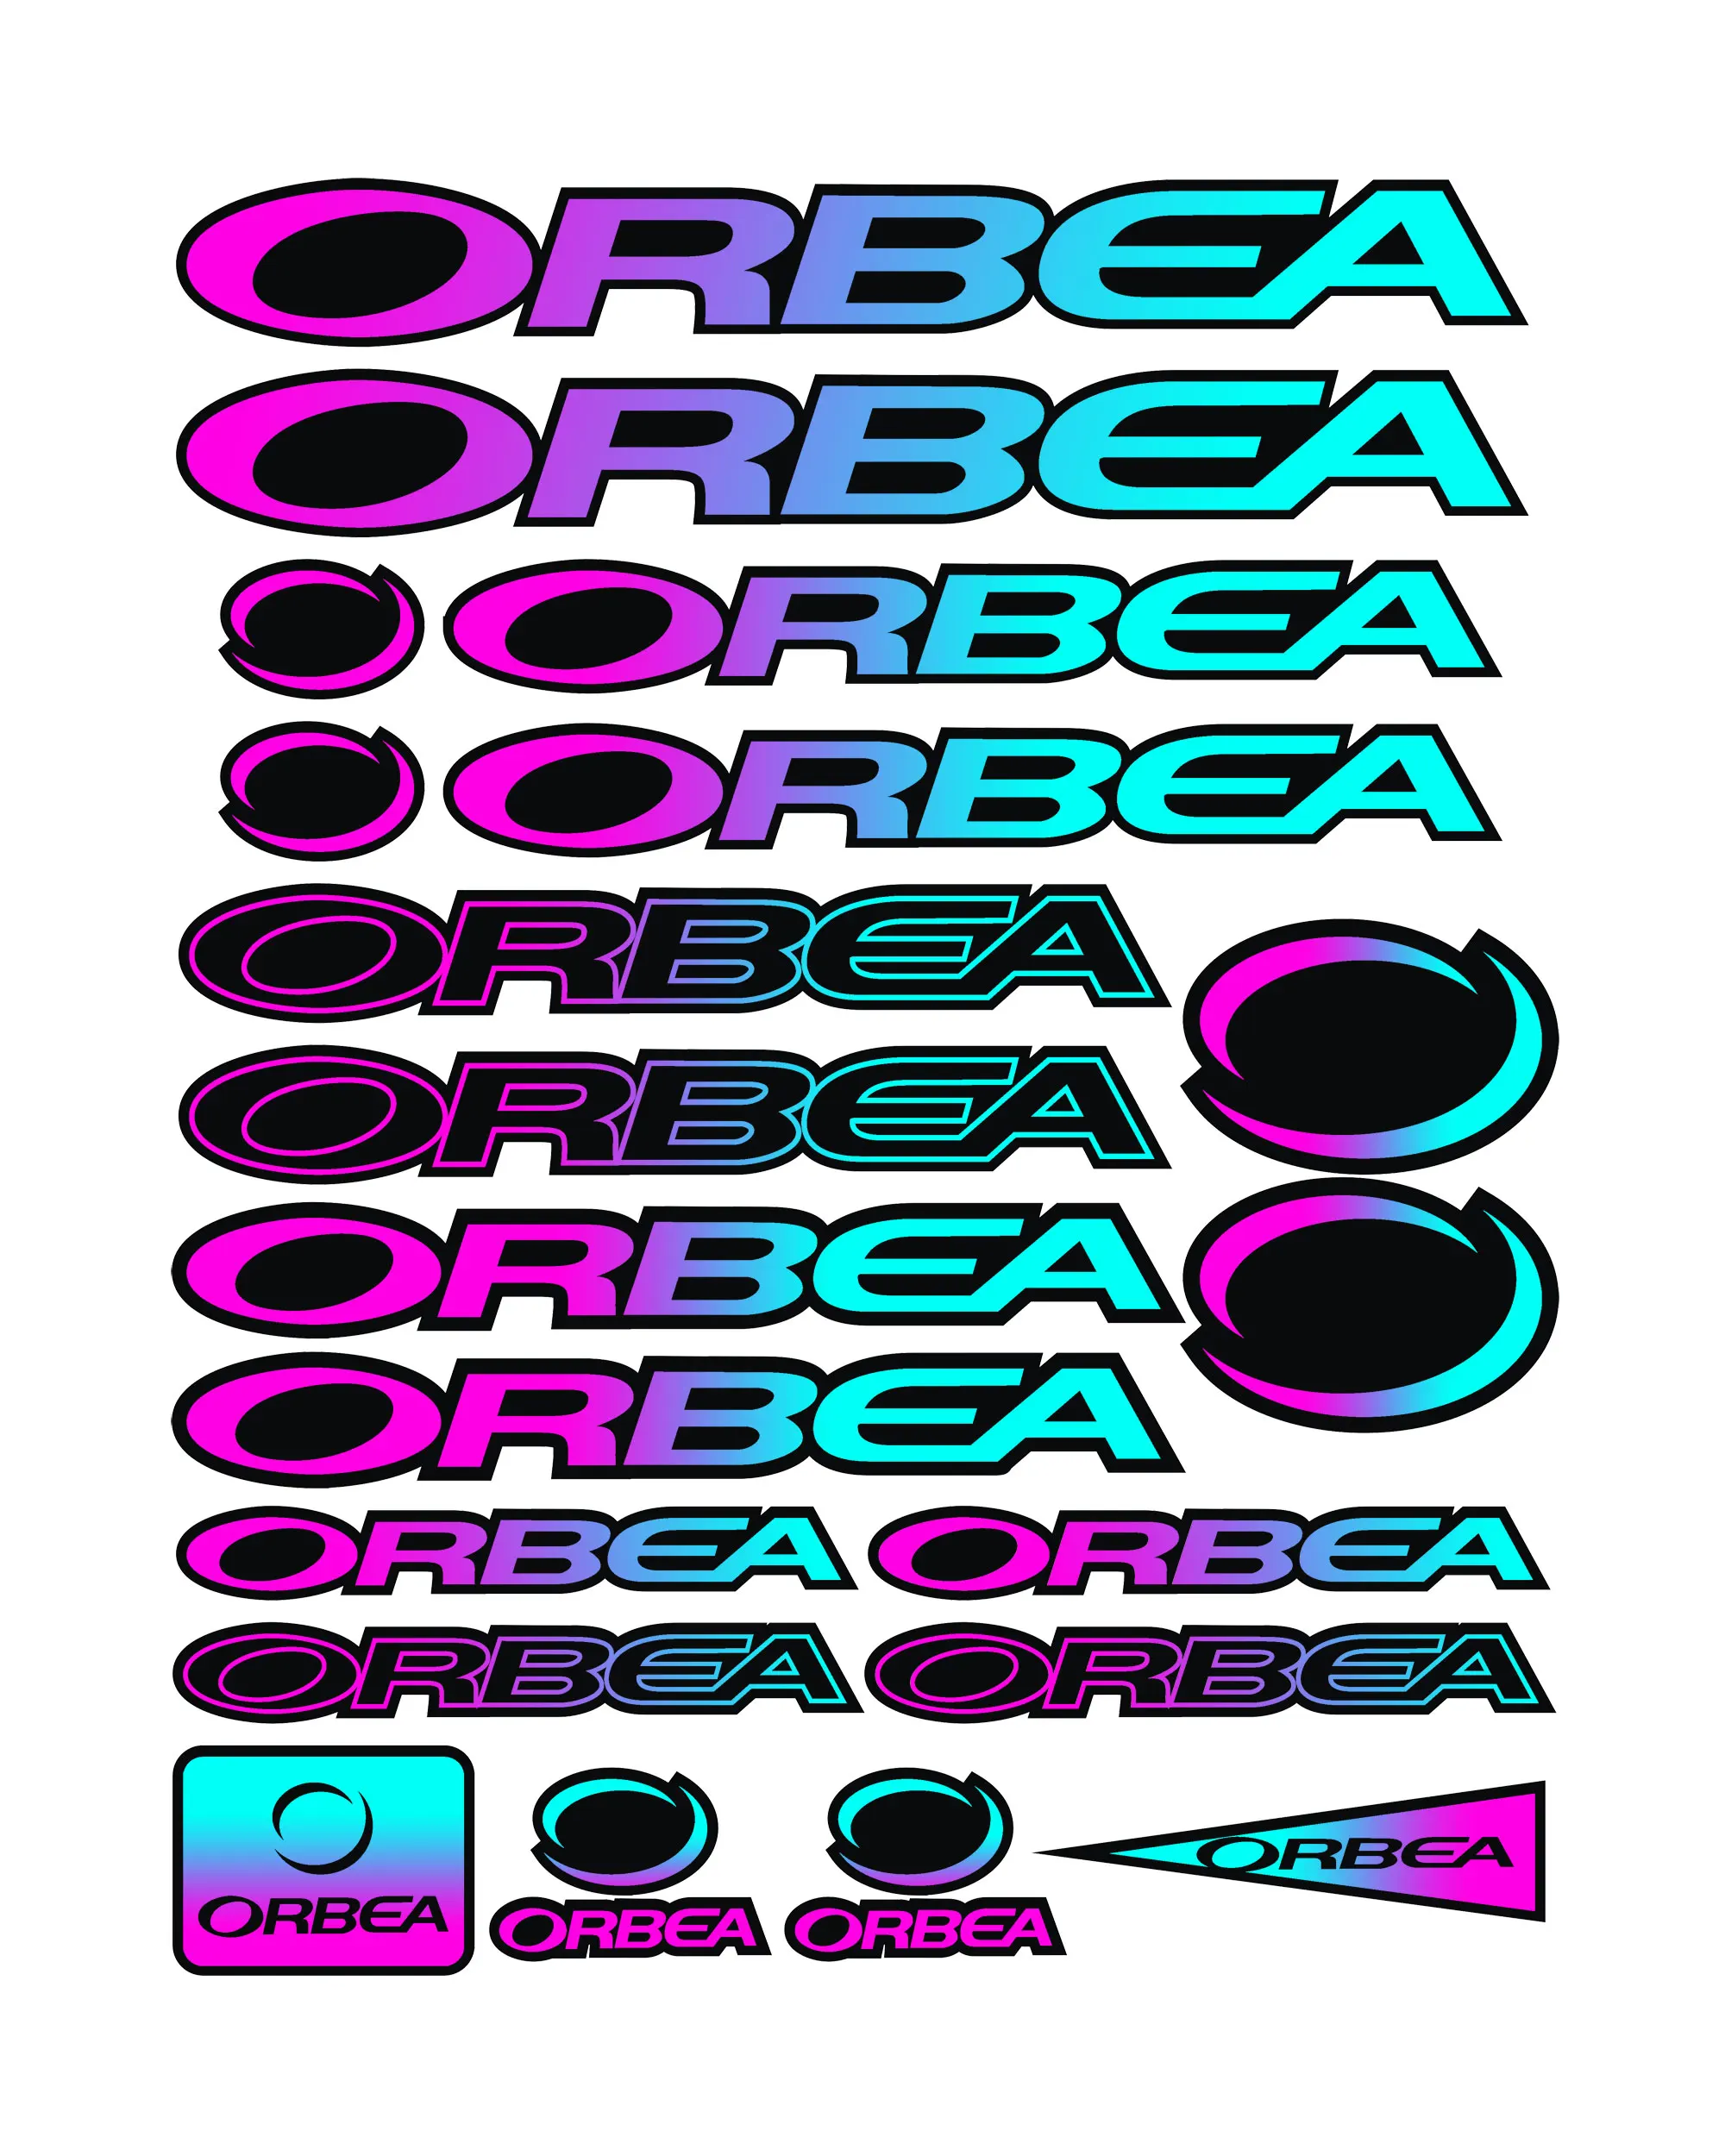 

Car Sticker for ORBEA MOUNTAIN Bicycle Frame Graphic Decals Car Styling Body Set Bike Accessories(Cycling, MTB,BMX,Race Road)